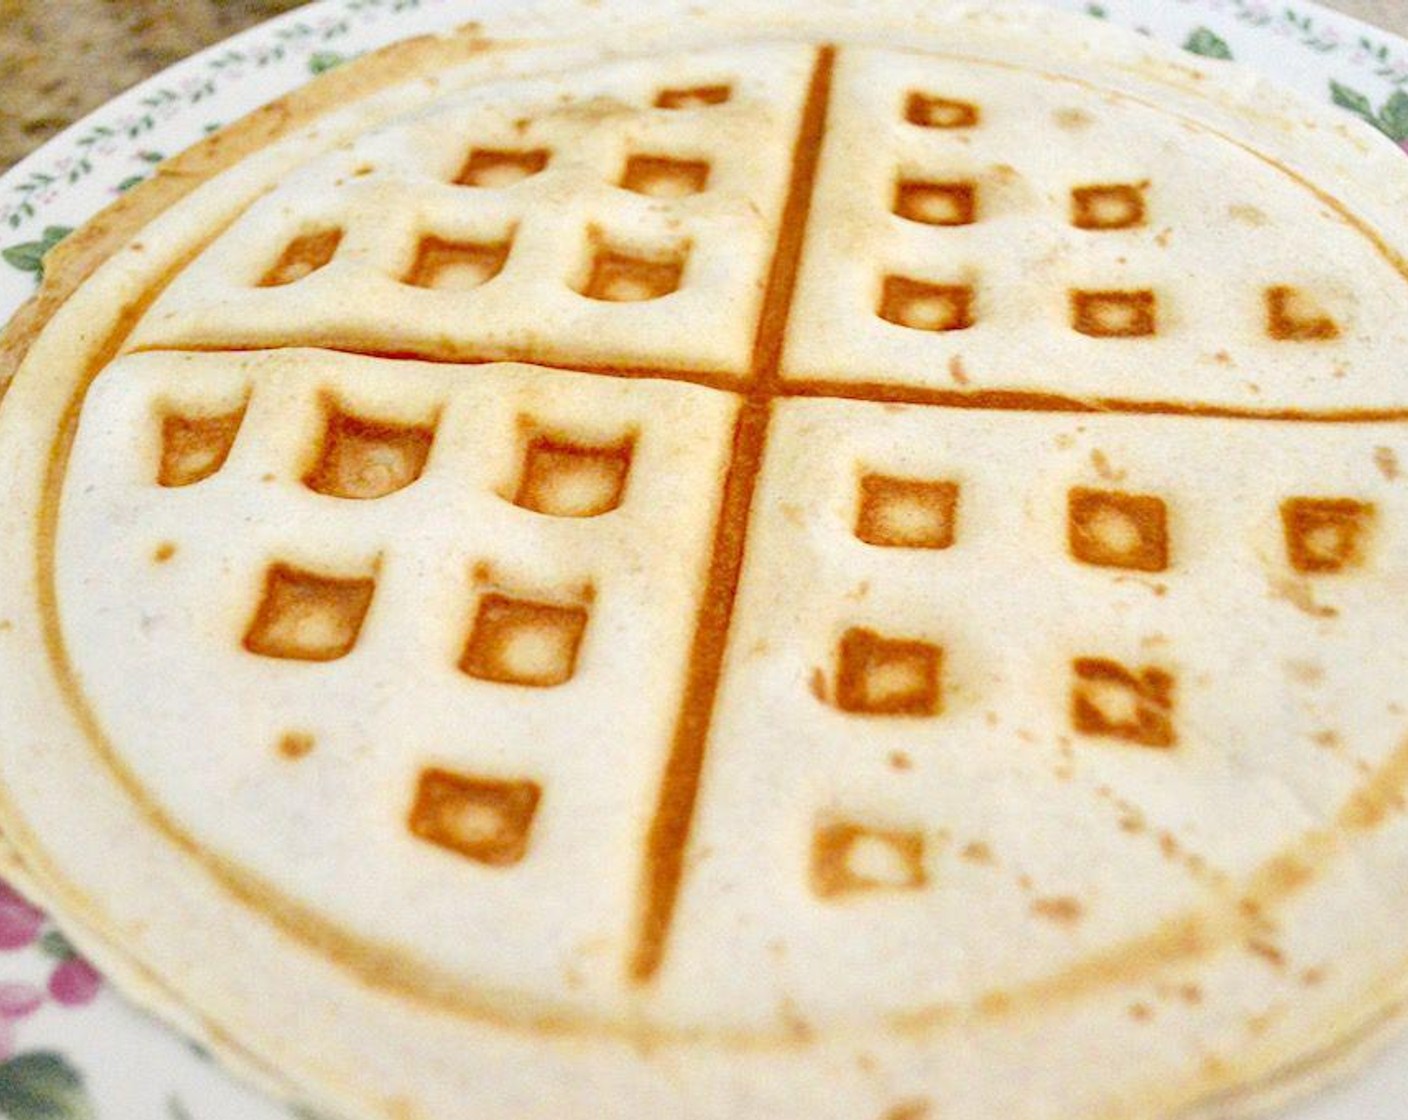 step 5 Cook it in the waffle iron for 5 minutes, until slightly crisp on the outside and melty. Repeat this with the remaining filling to make 4 total.